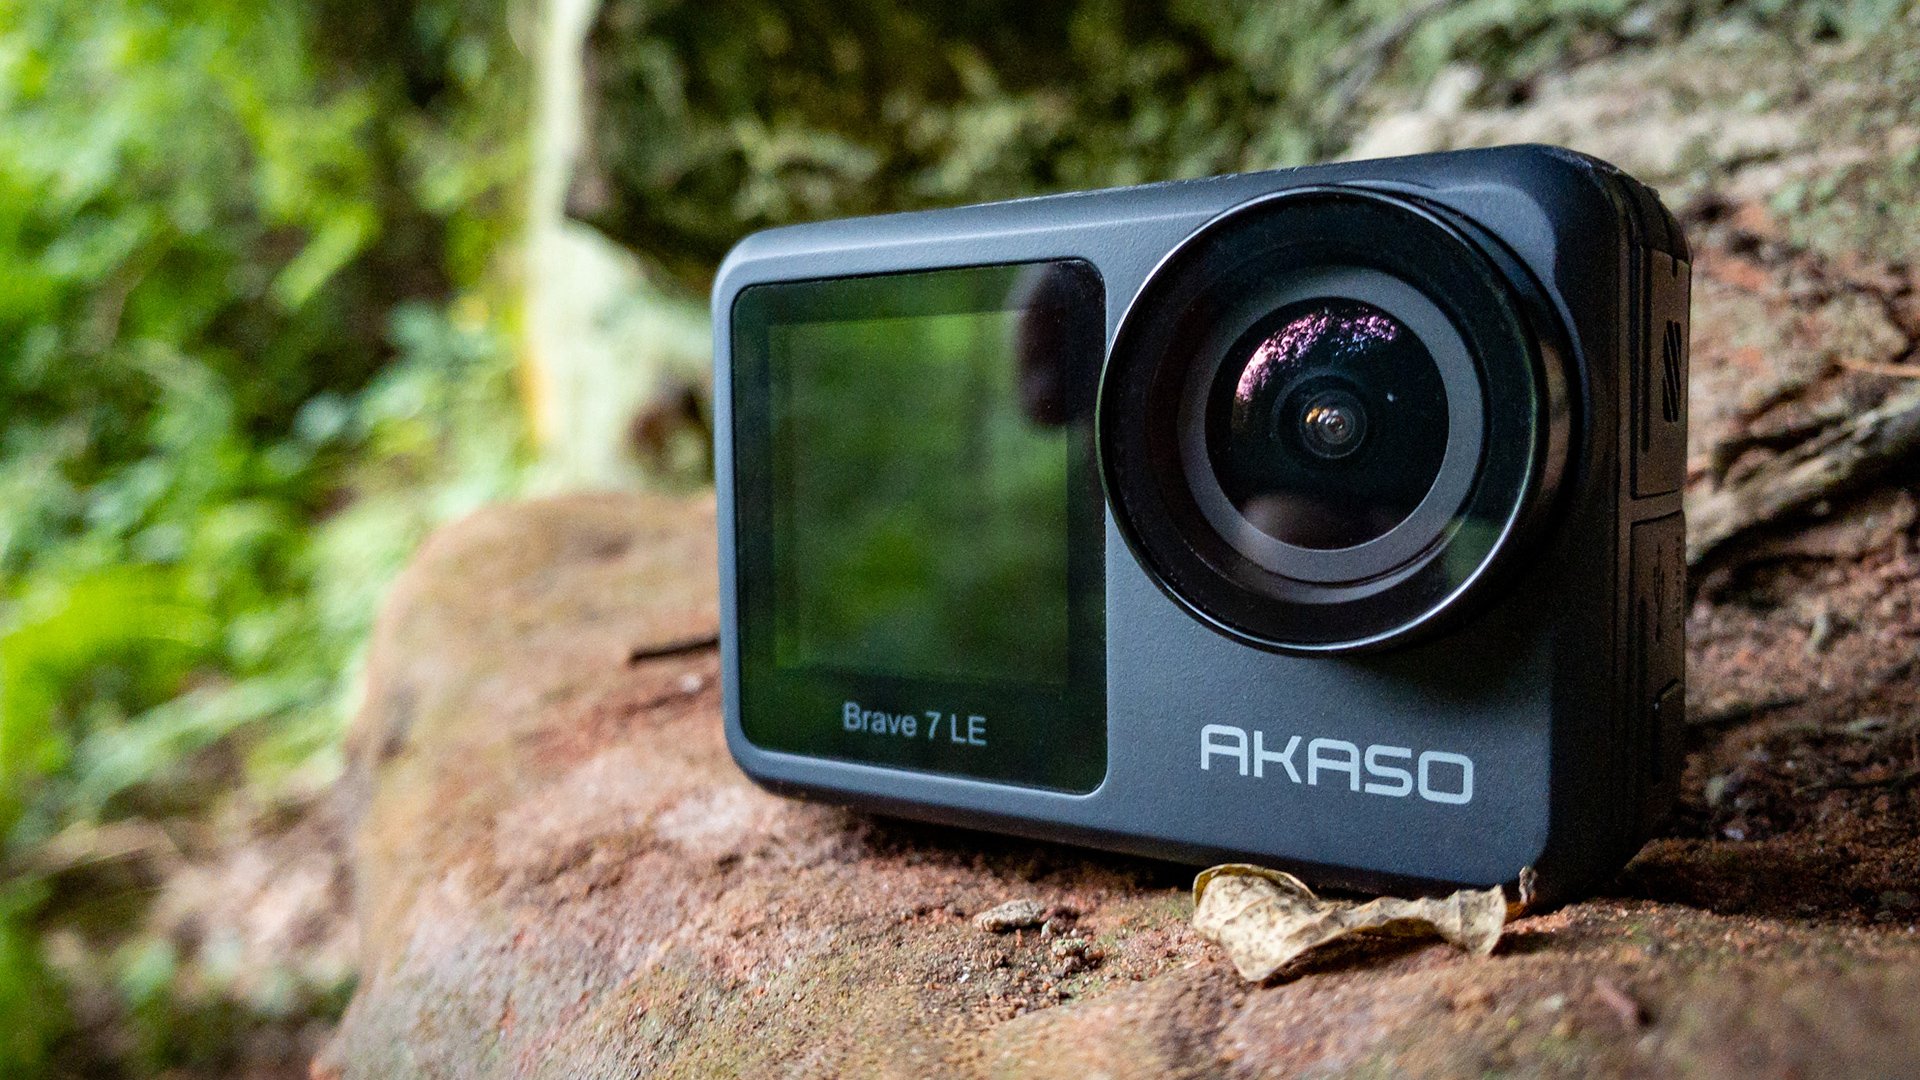 AKASO Brave 7 LE review: Remarkable value for money and